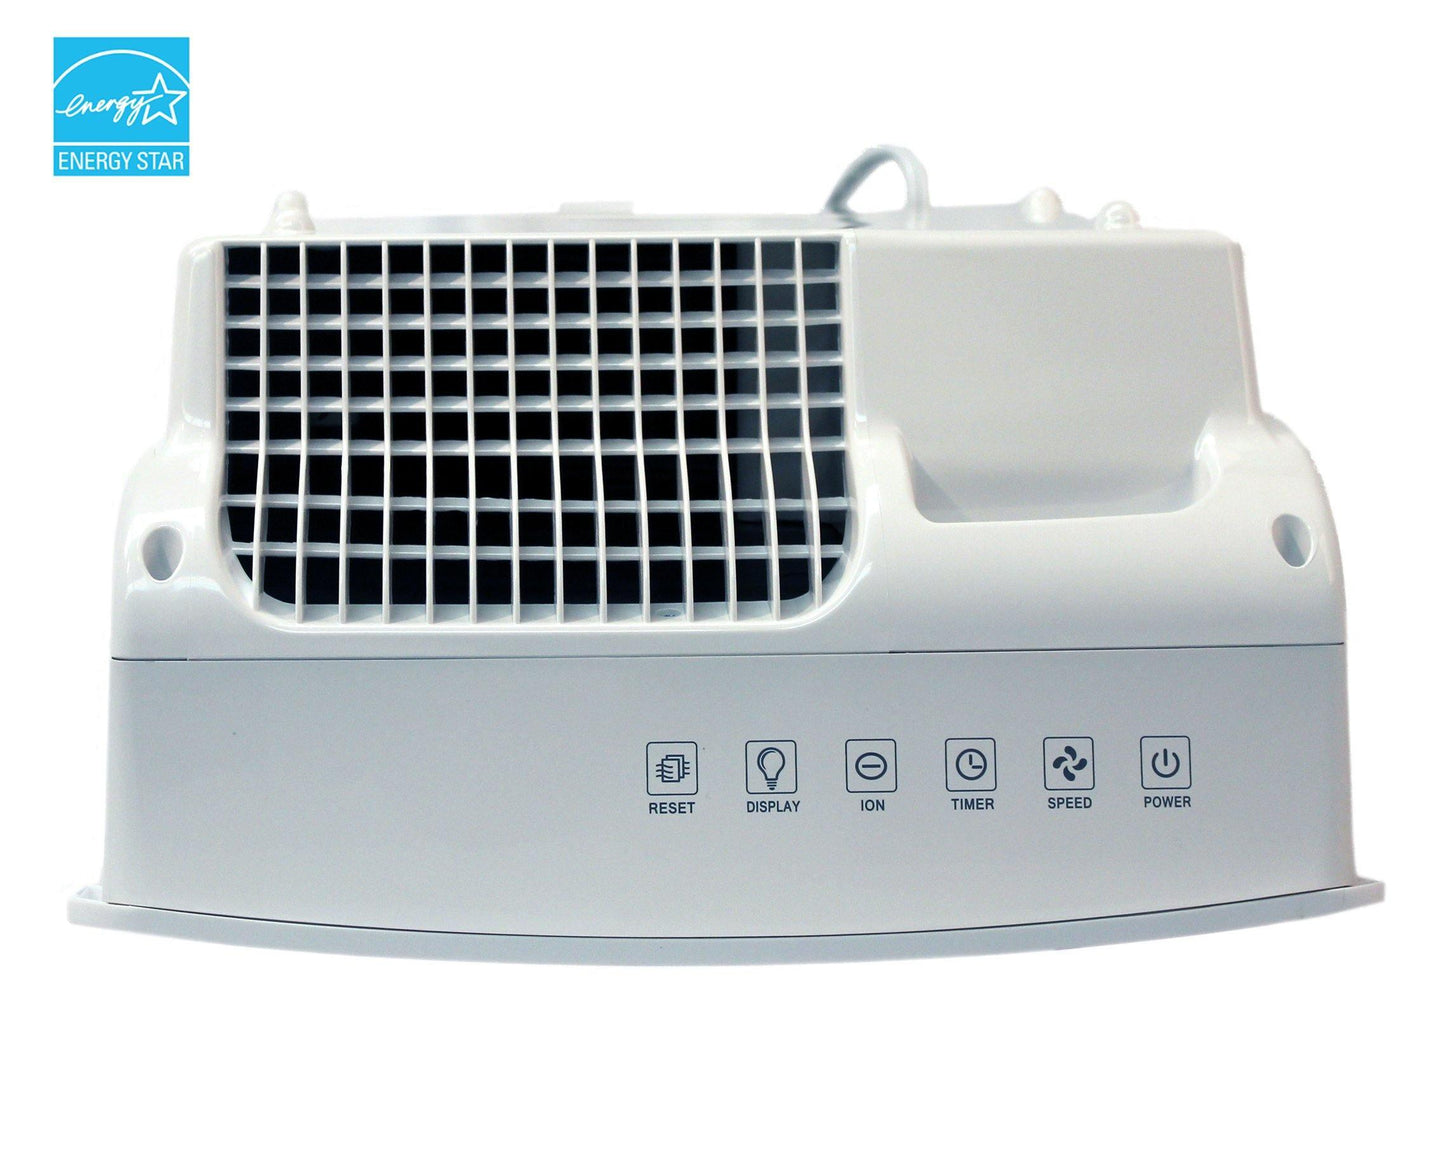 SPT HEPA Air Cleaner with Triple Filtration - Elite Air Purifiers